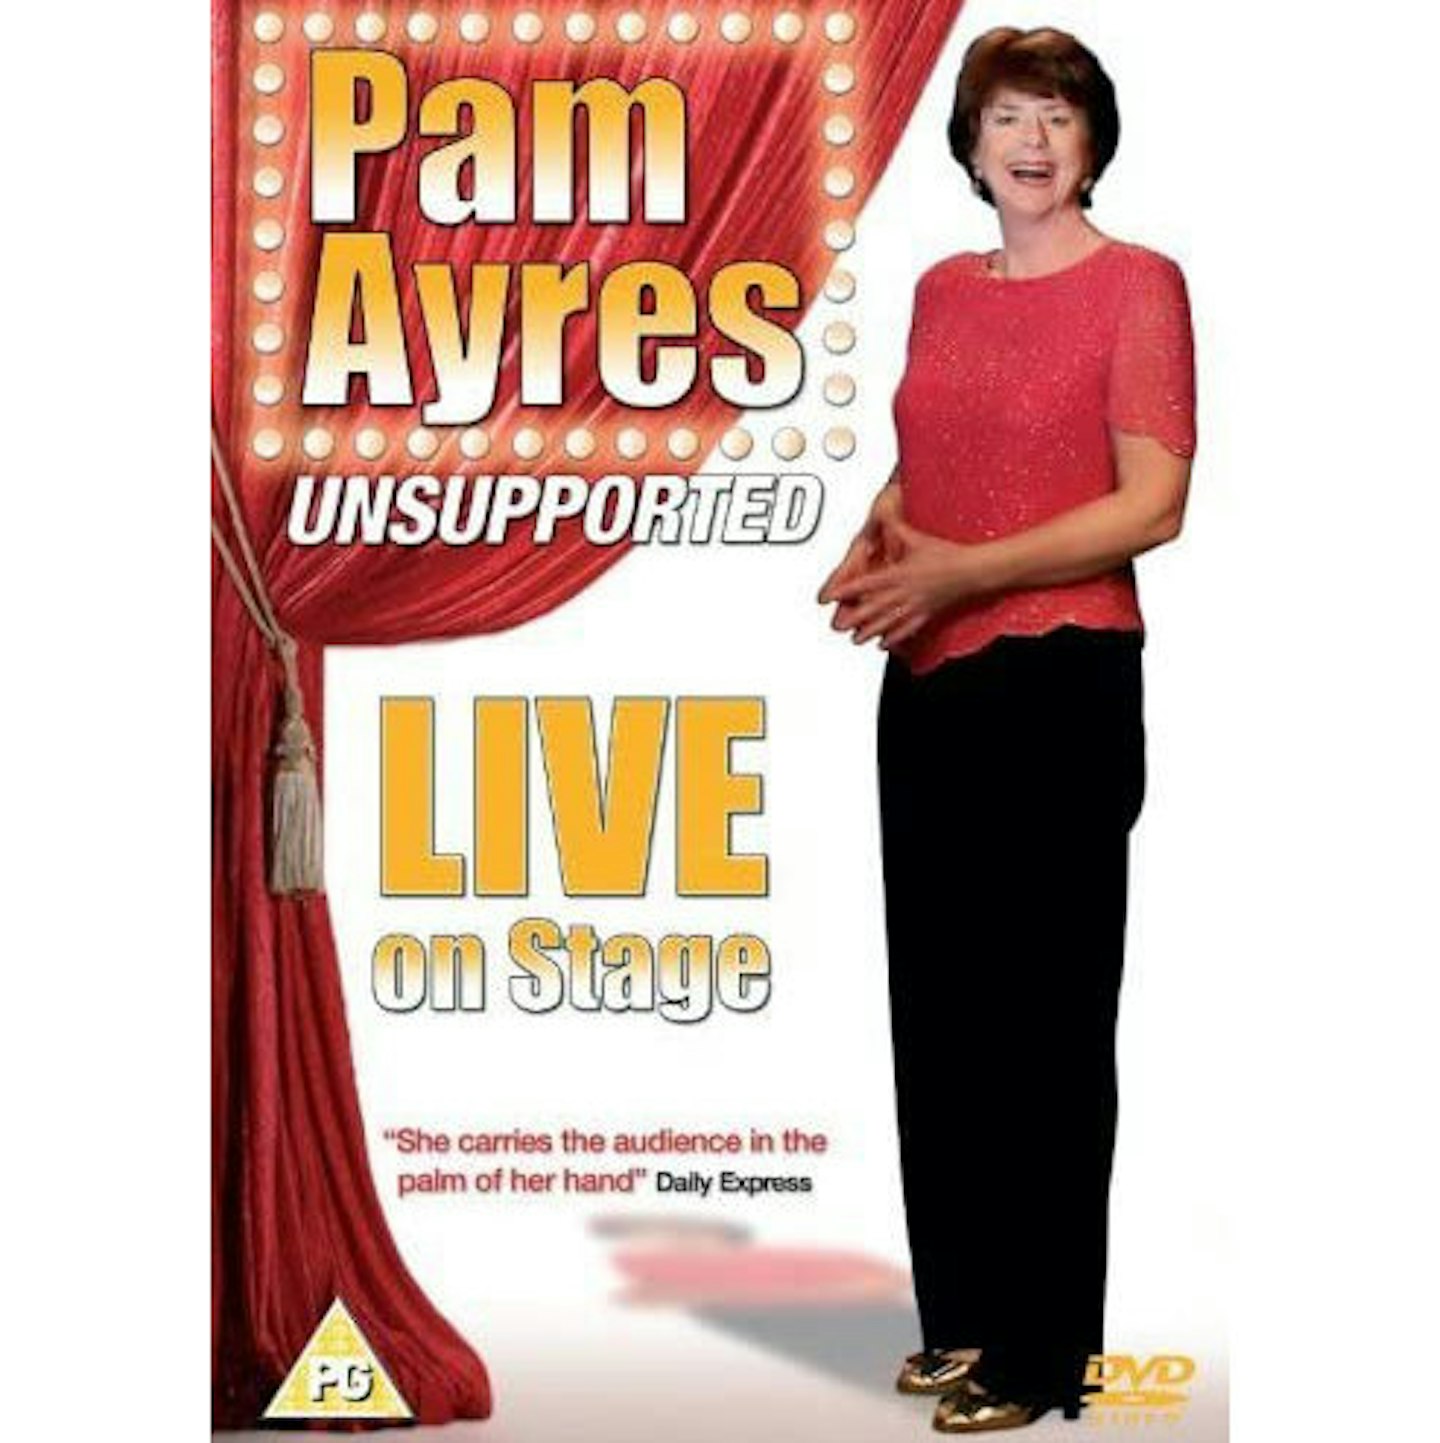 Pam Ayres Unsupported: Live On Stage